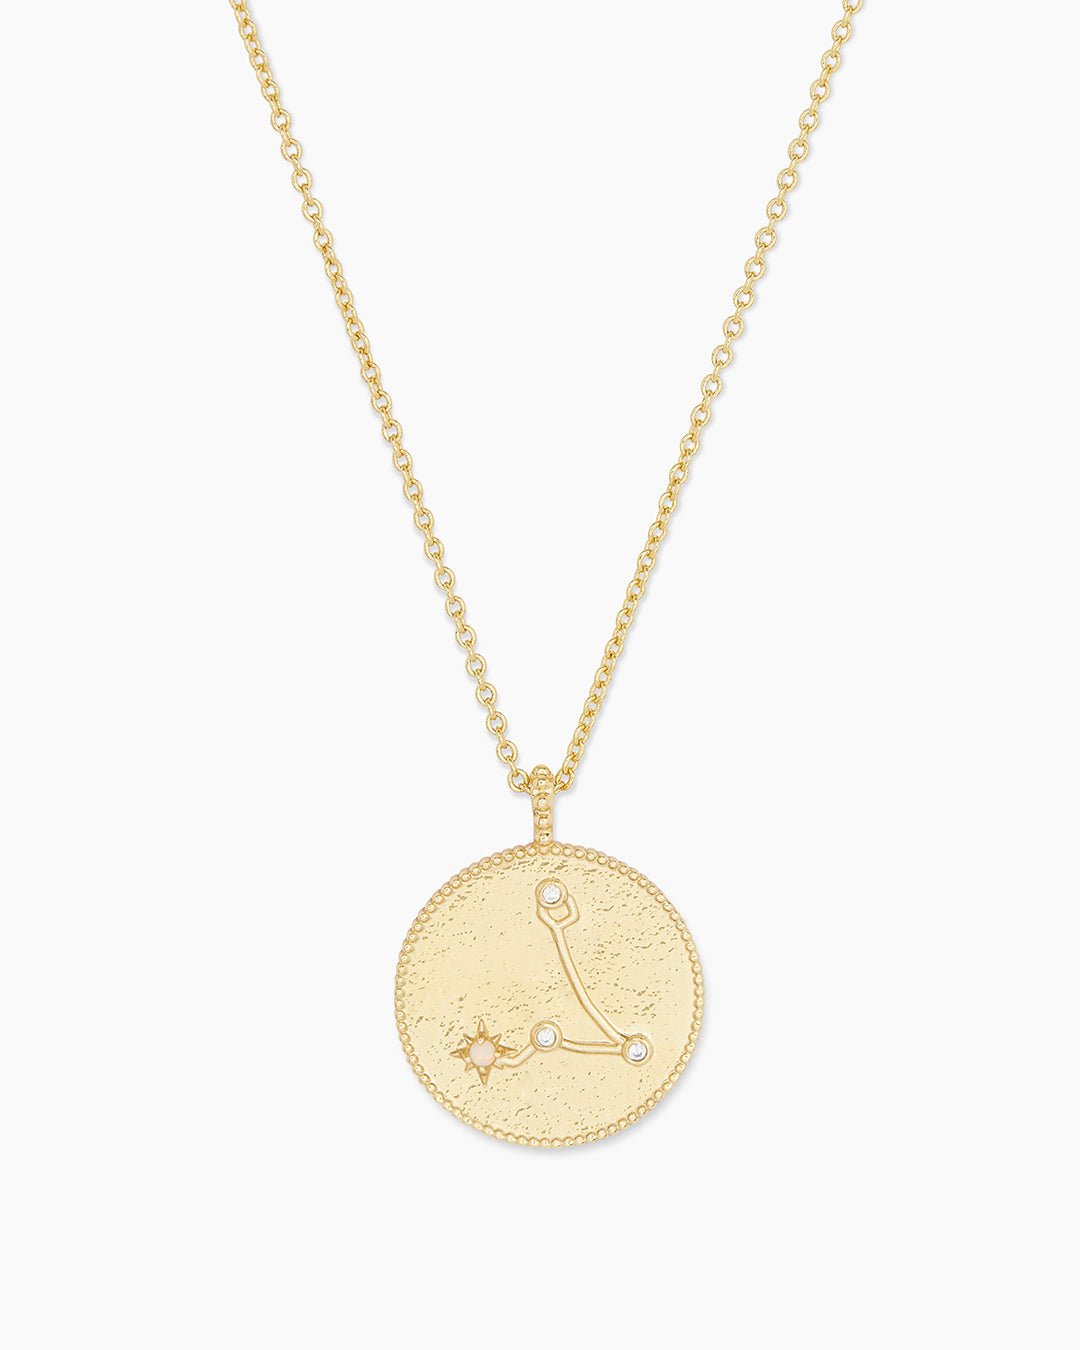  Astrology Coin Necklace (Pisces) || option::Gold Plated, Pisces